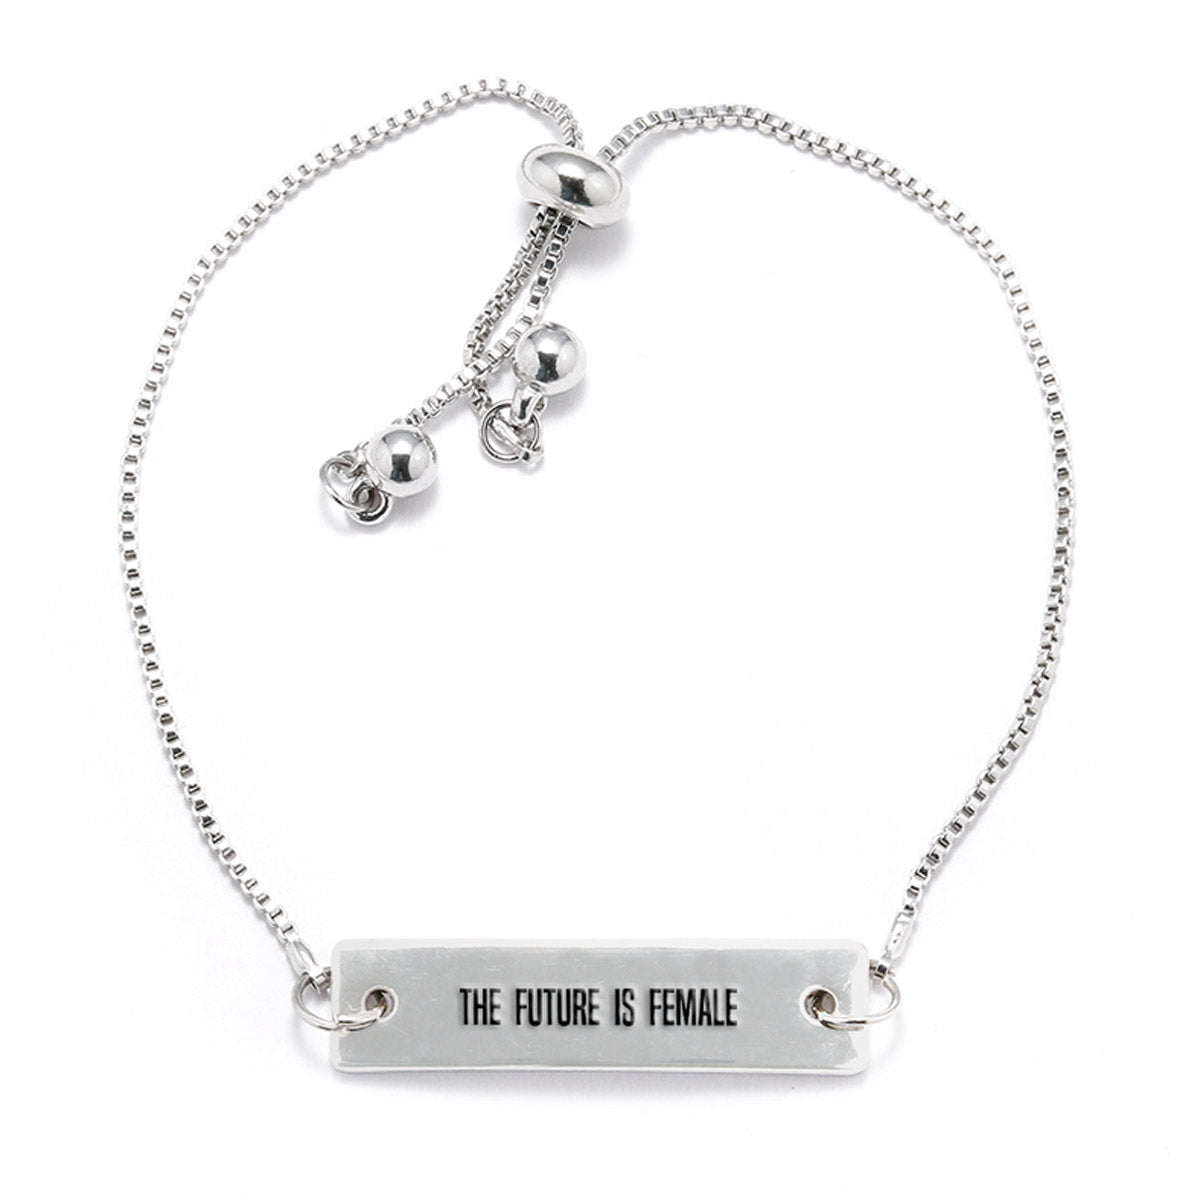 The Future is Female Silver Bar Adjustable Bracelet - pipercleo.com